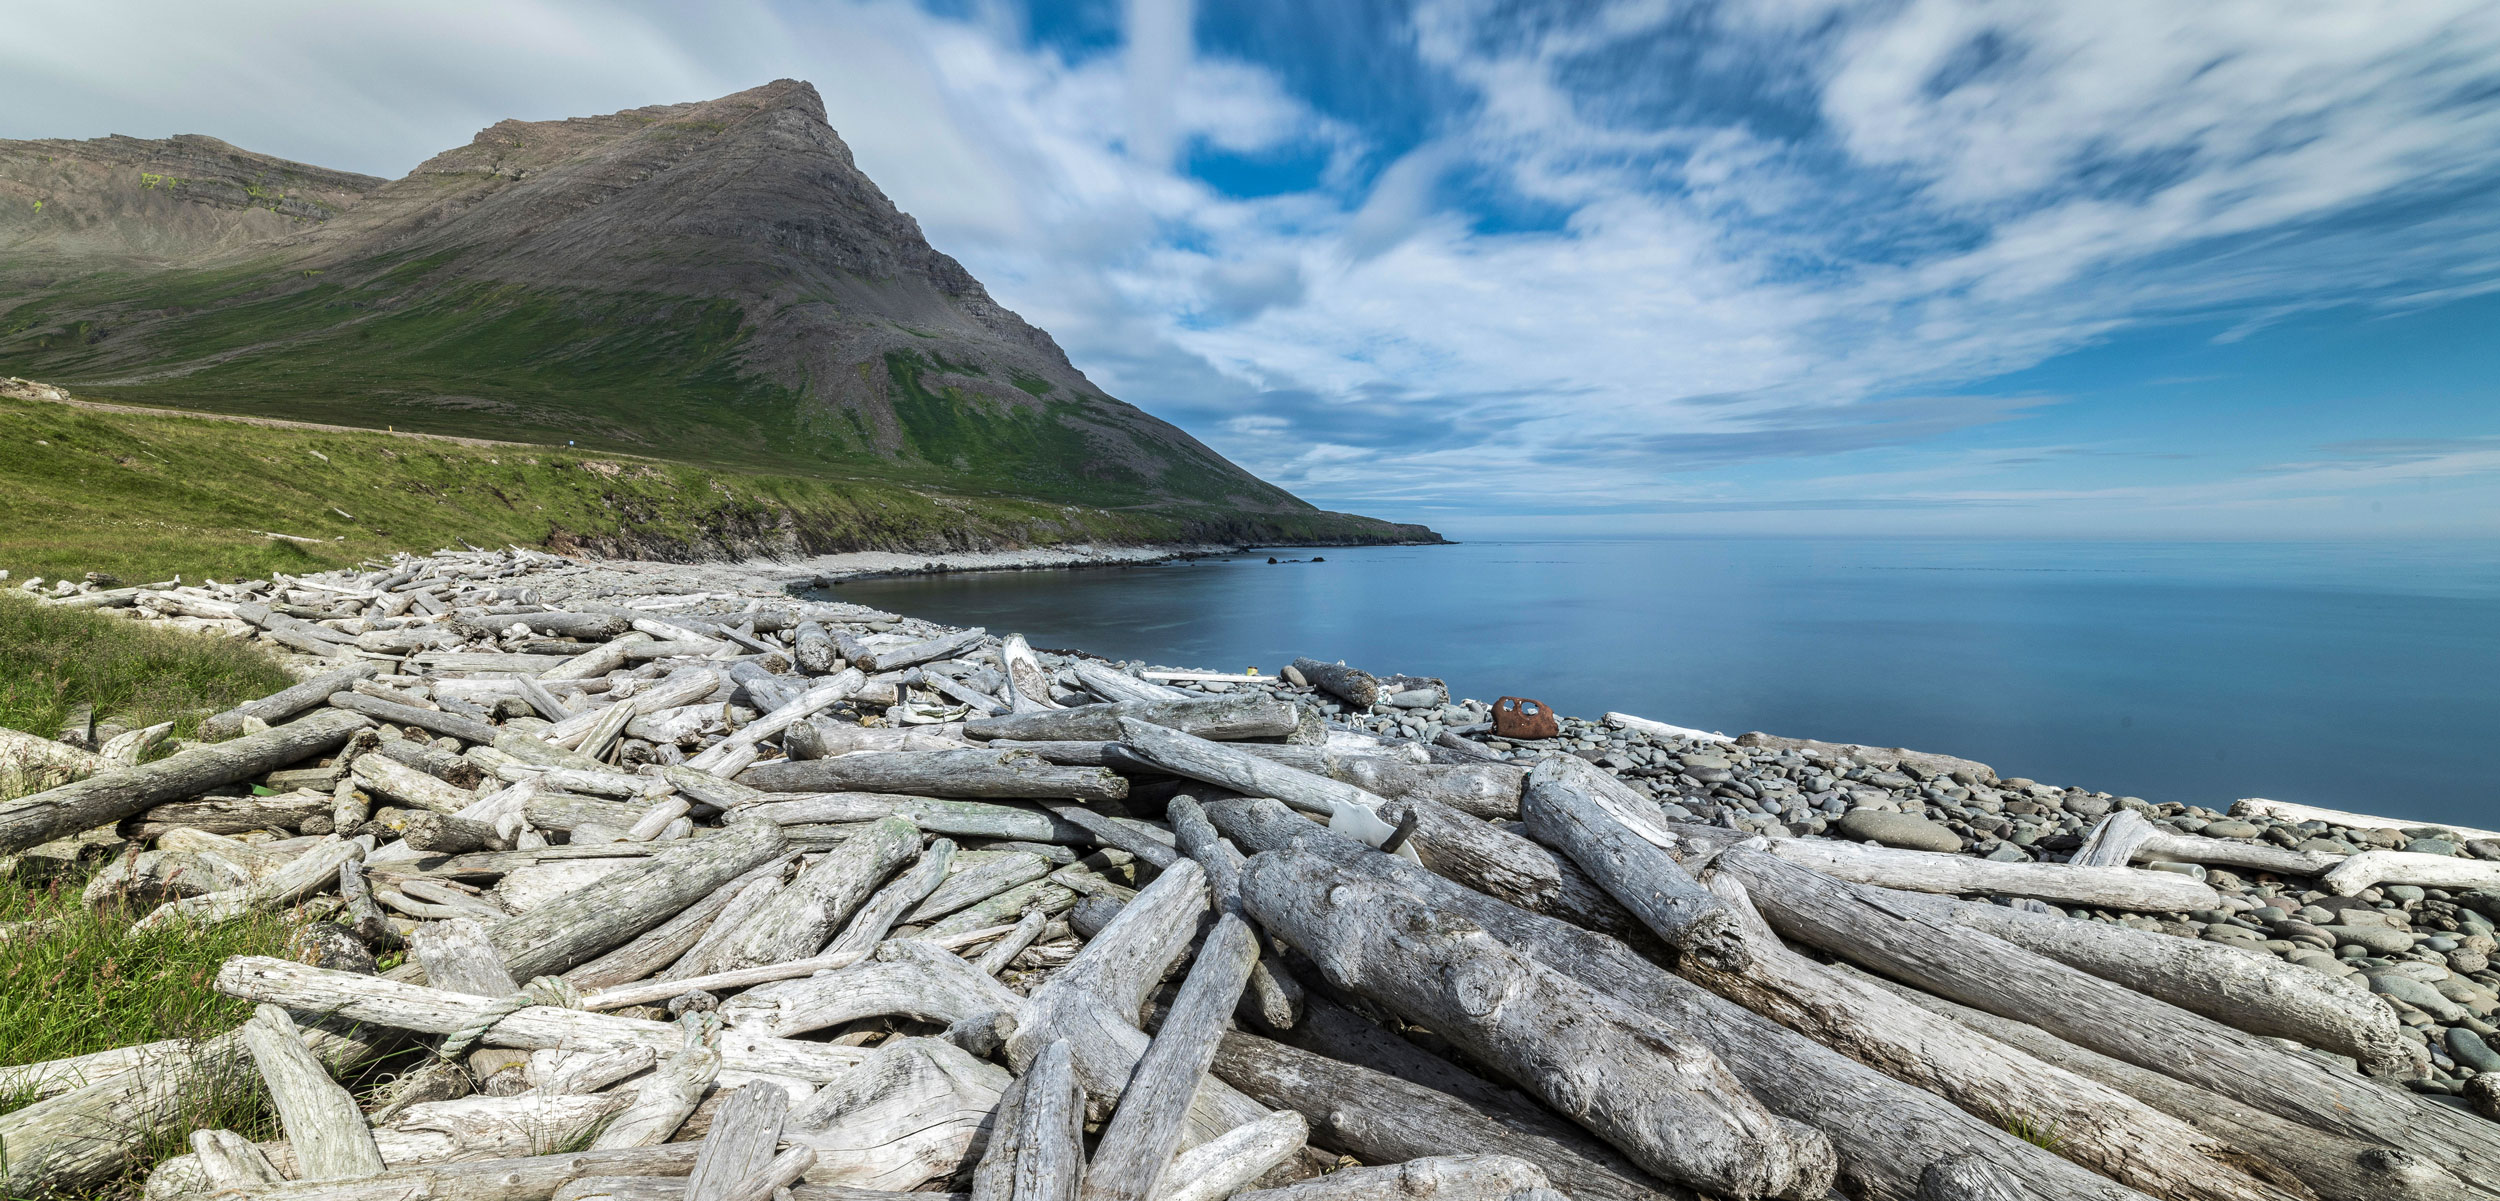 driftwood on shore in Iceland